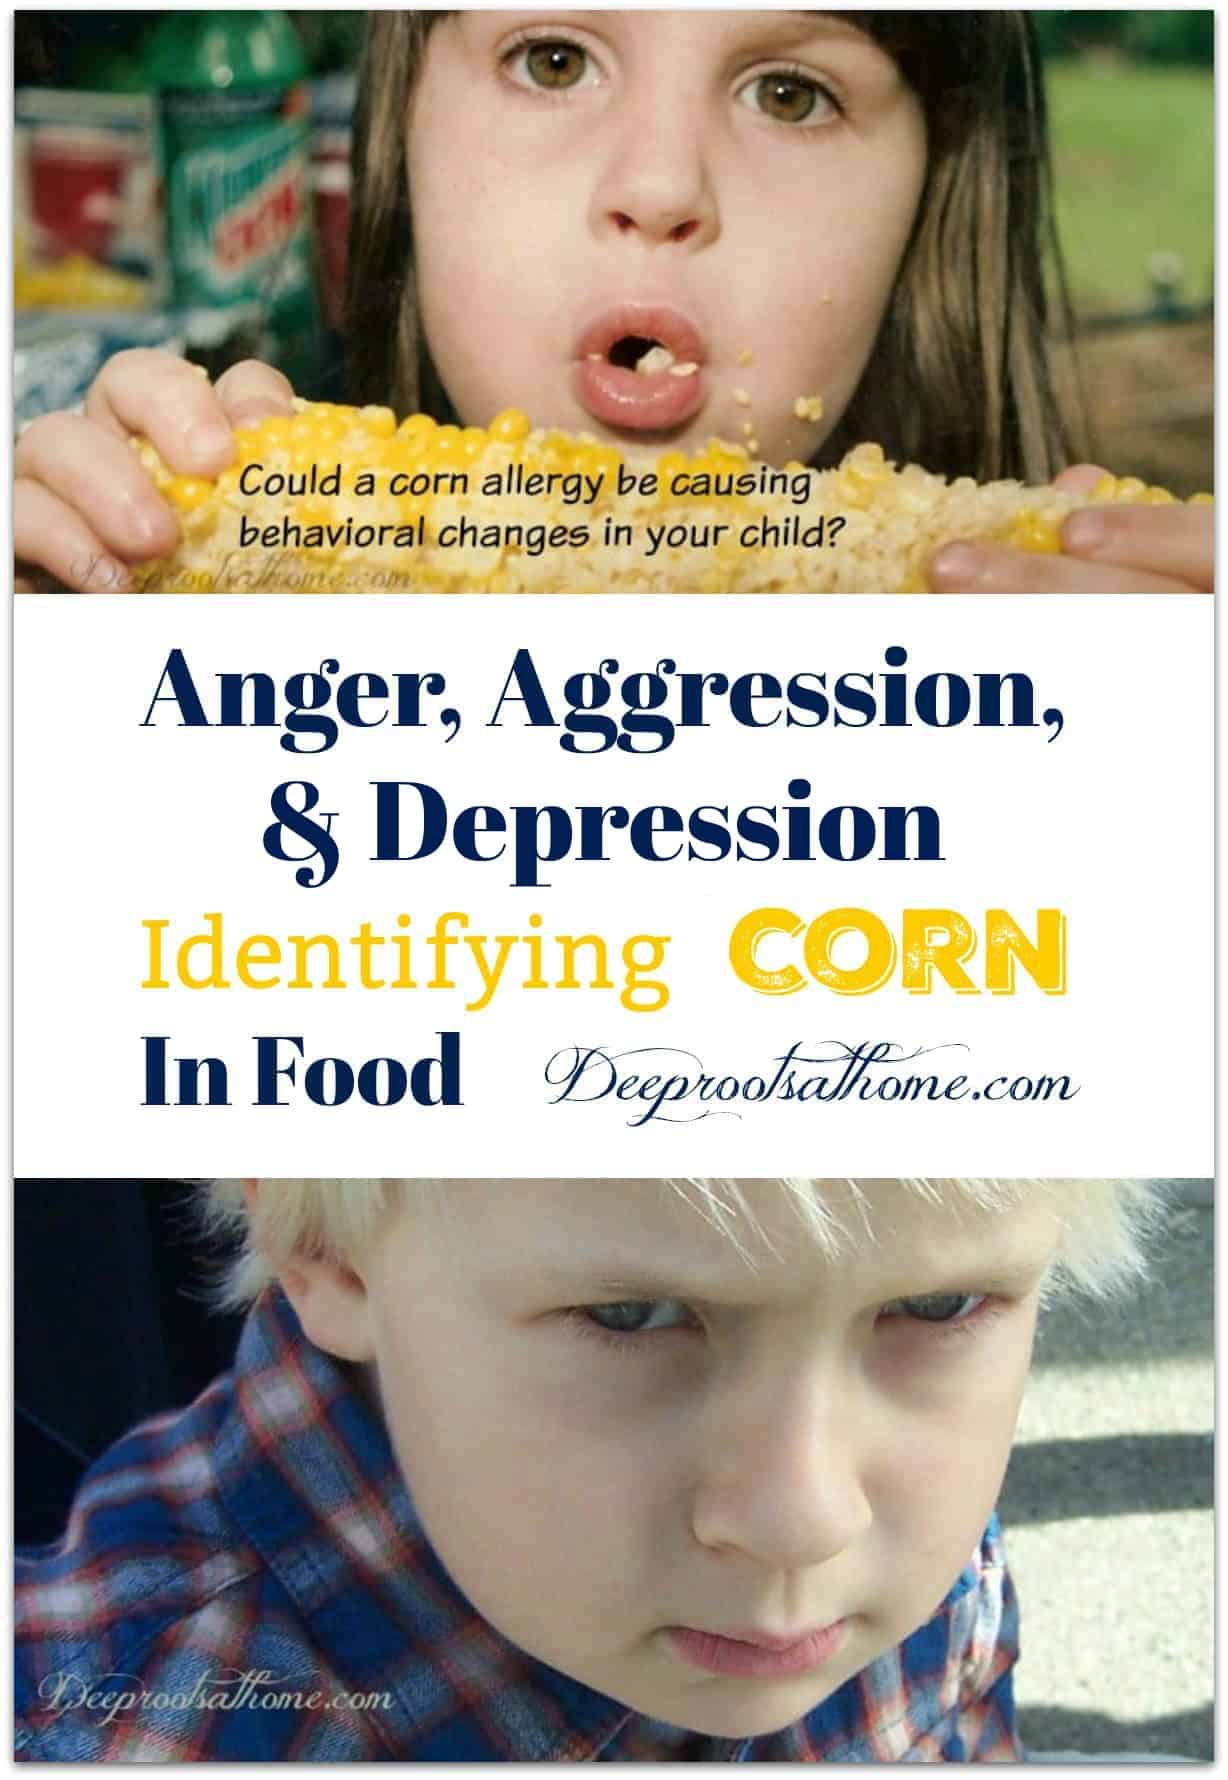 Anger, Aggression, Depression? Identifying Corn In Food. A 8 or 9 year old girl eating corn on the cob with pieces of corn stuck to her face. Also a young boy with a sullen, defiant expression.